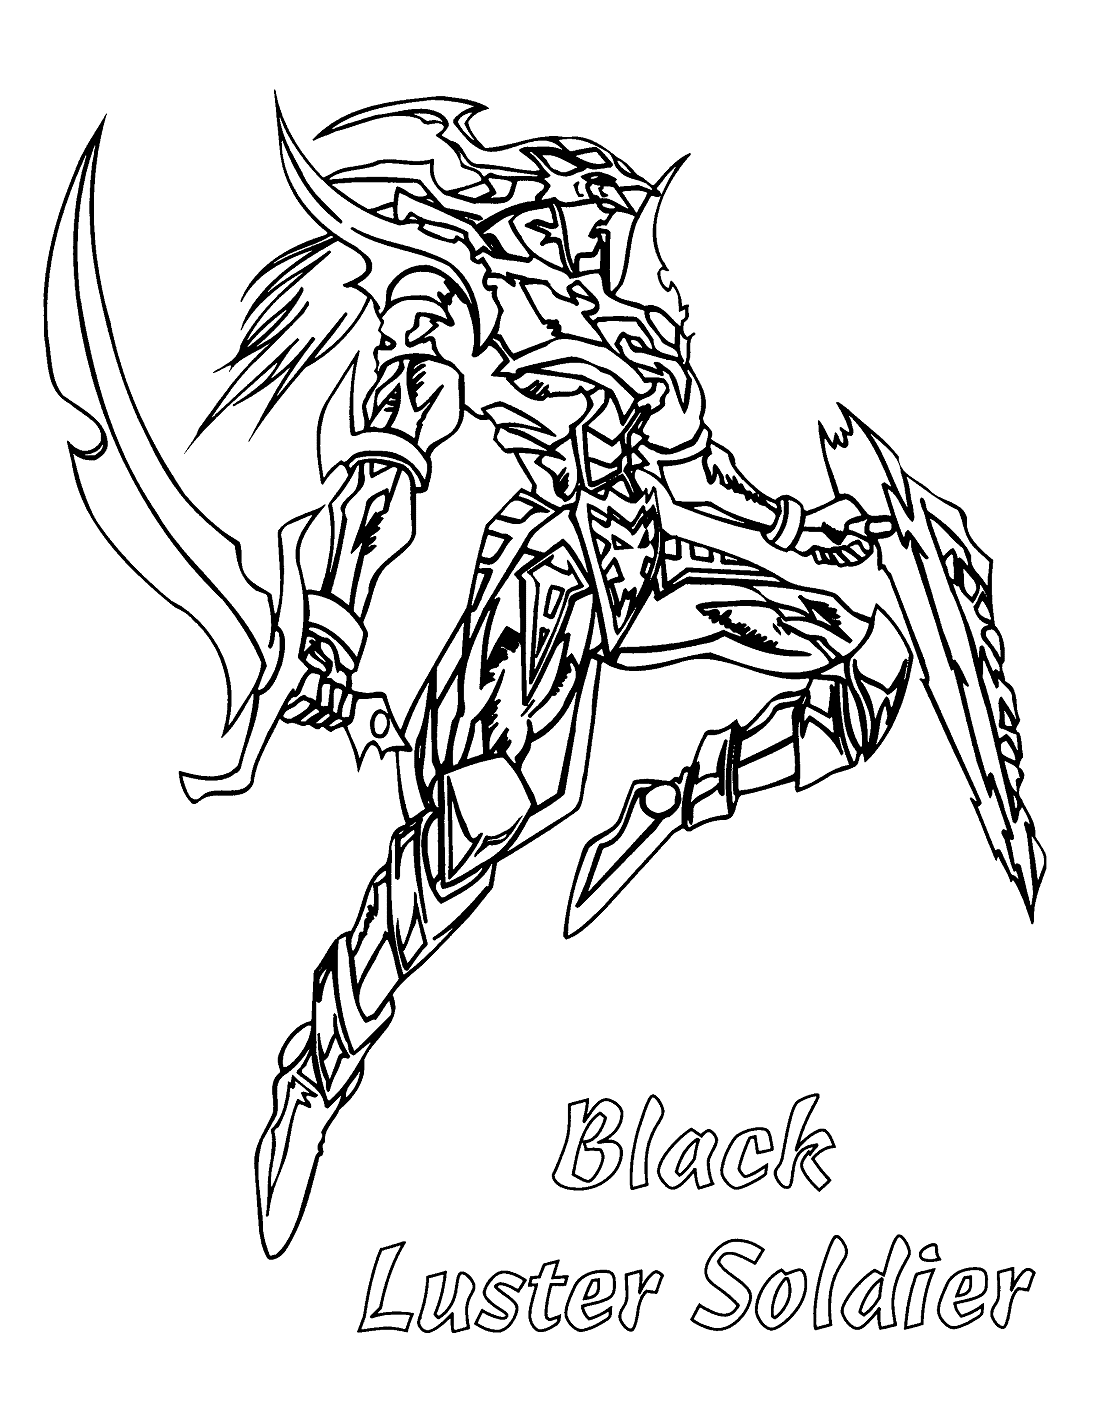 Black Luster Soldier Coloring Page